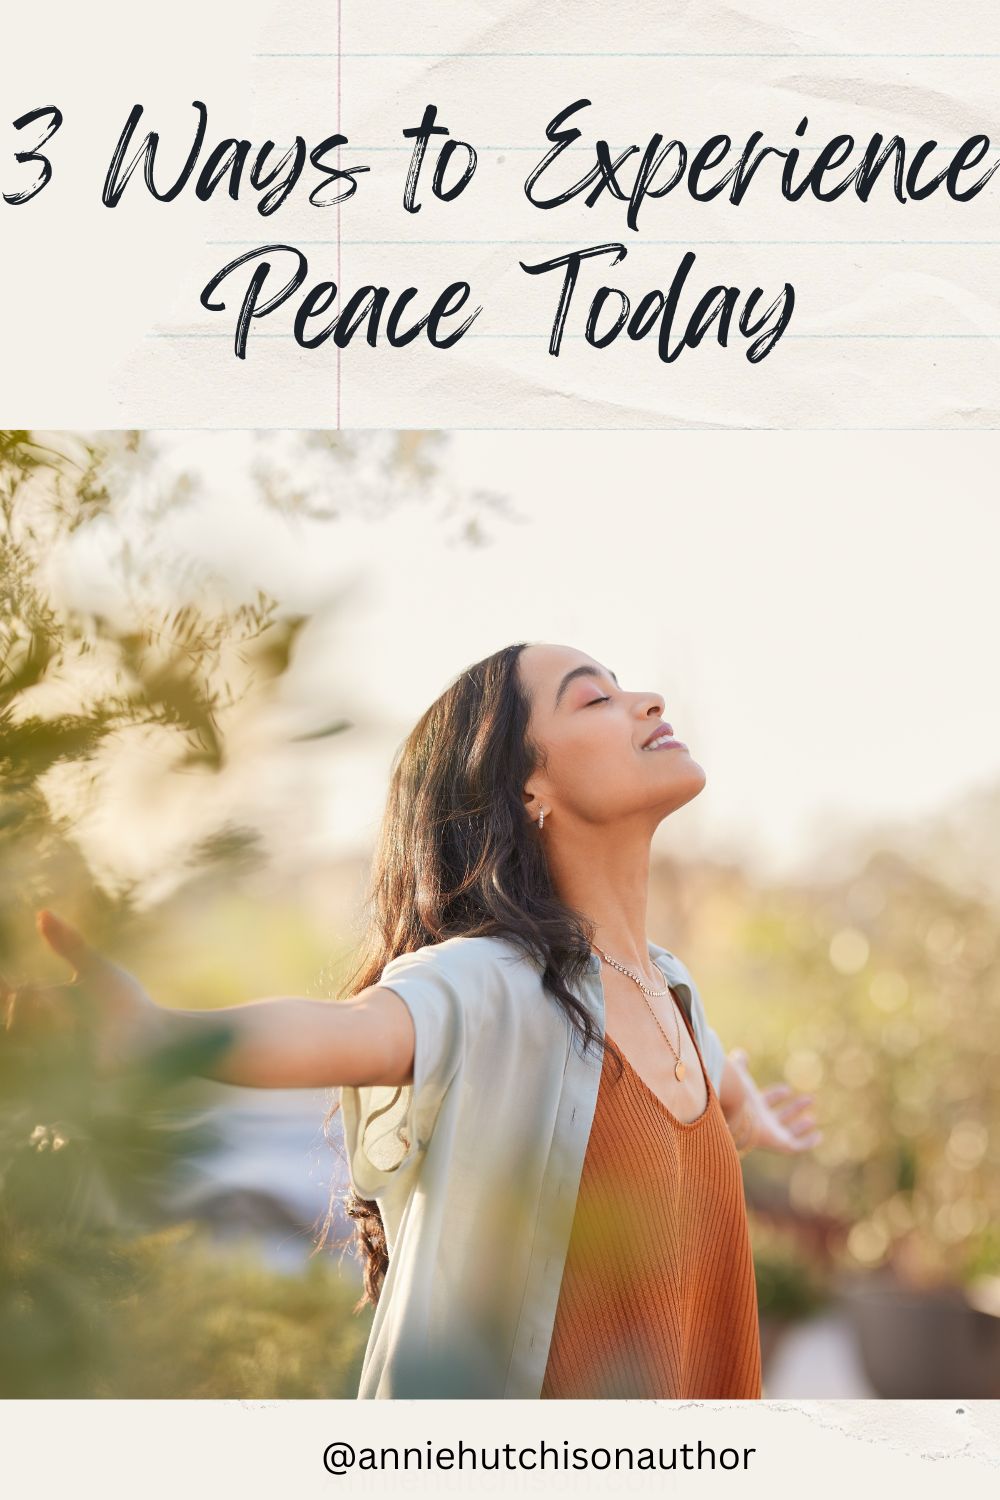 3 Ways to Experience Peace Today